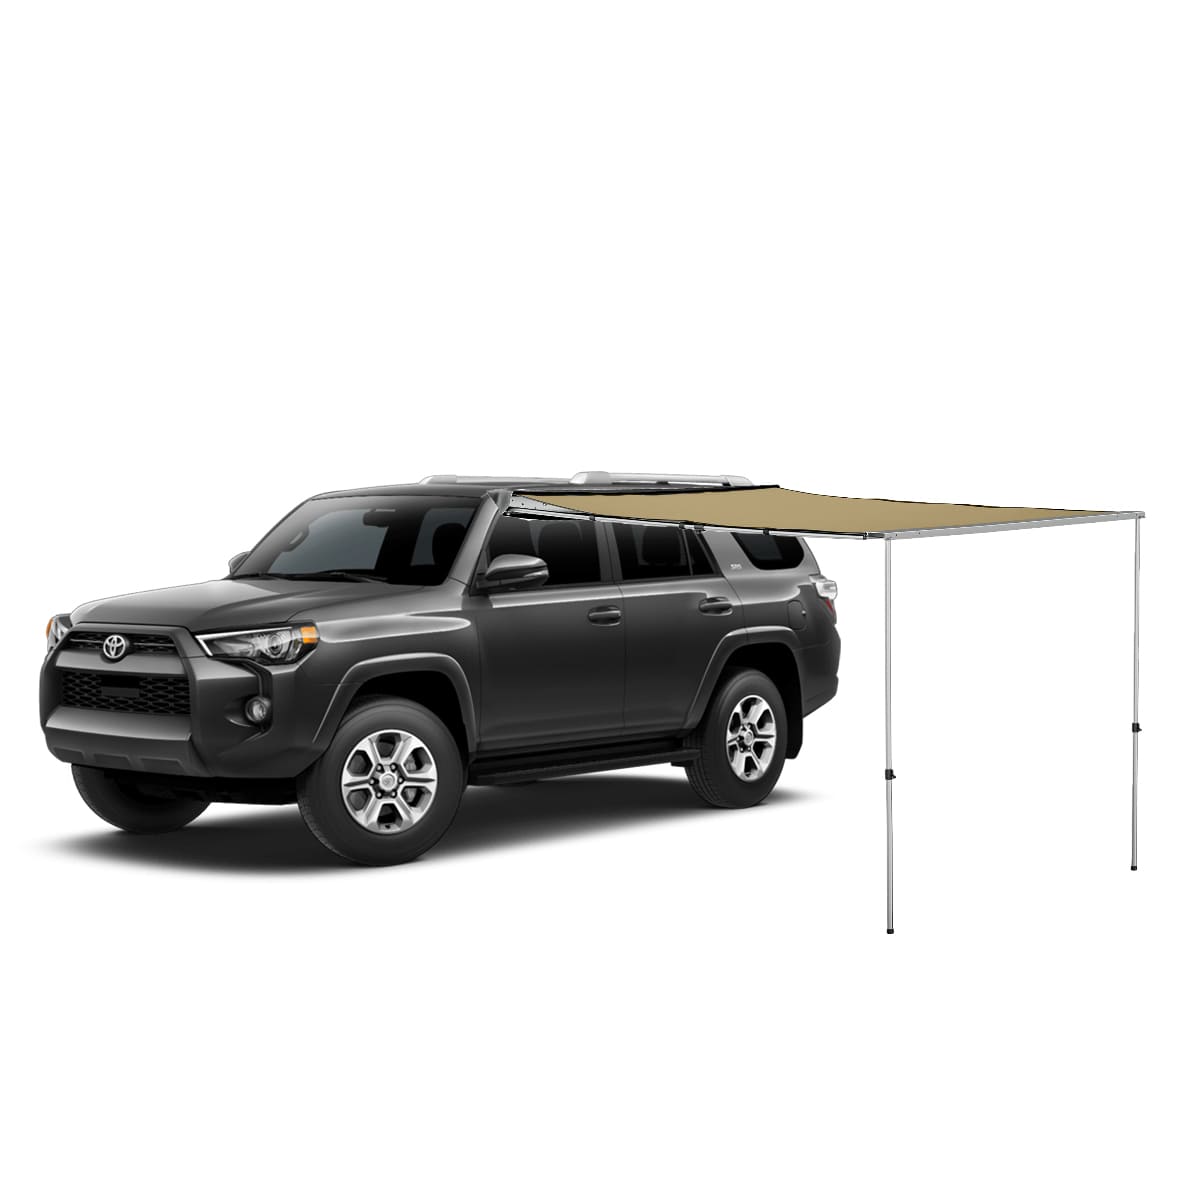 6.7' x 8.2' Car Side Awning, Soft Shell, Pull Out Rooftop Tent Shelter - BENEHIKE